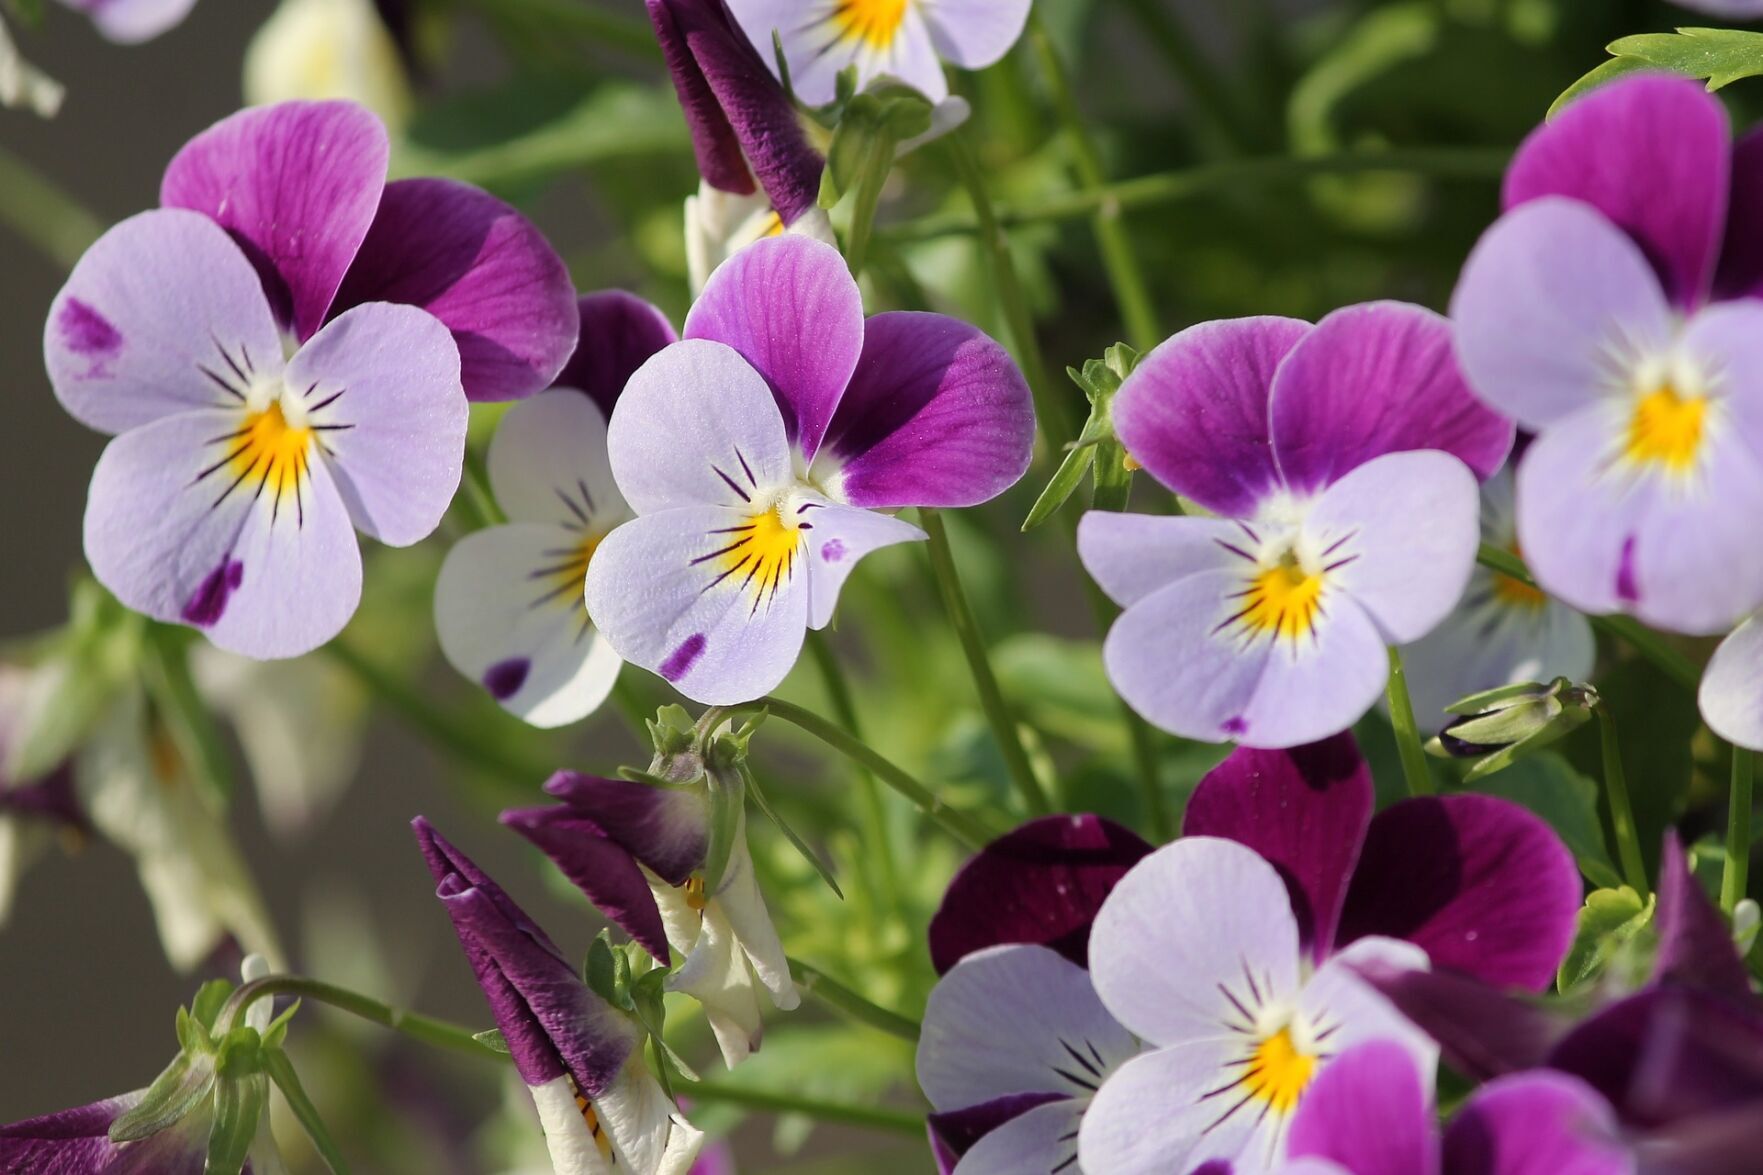 pansies poisonous to dogs